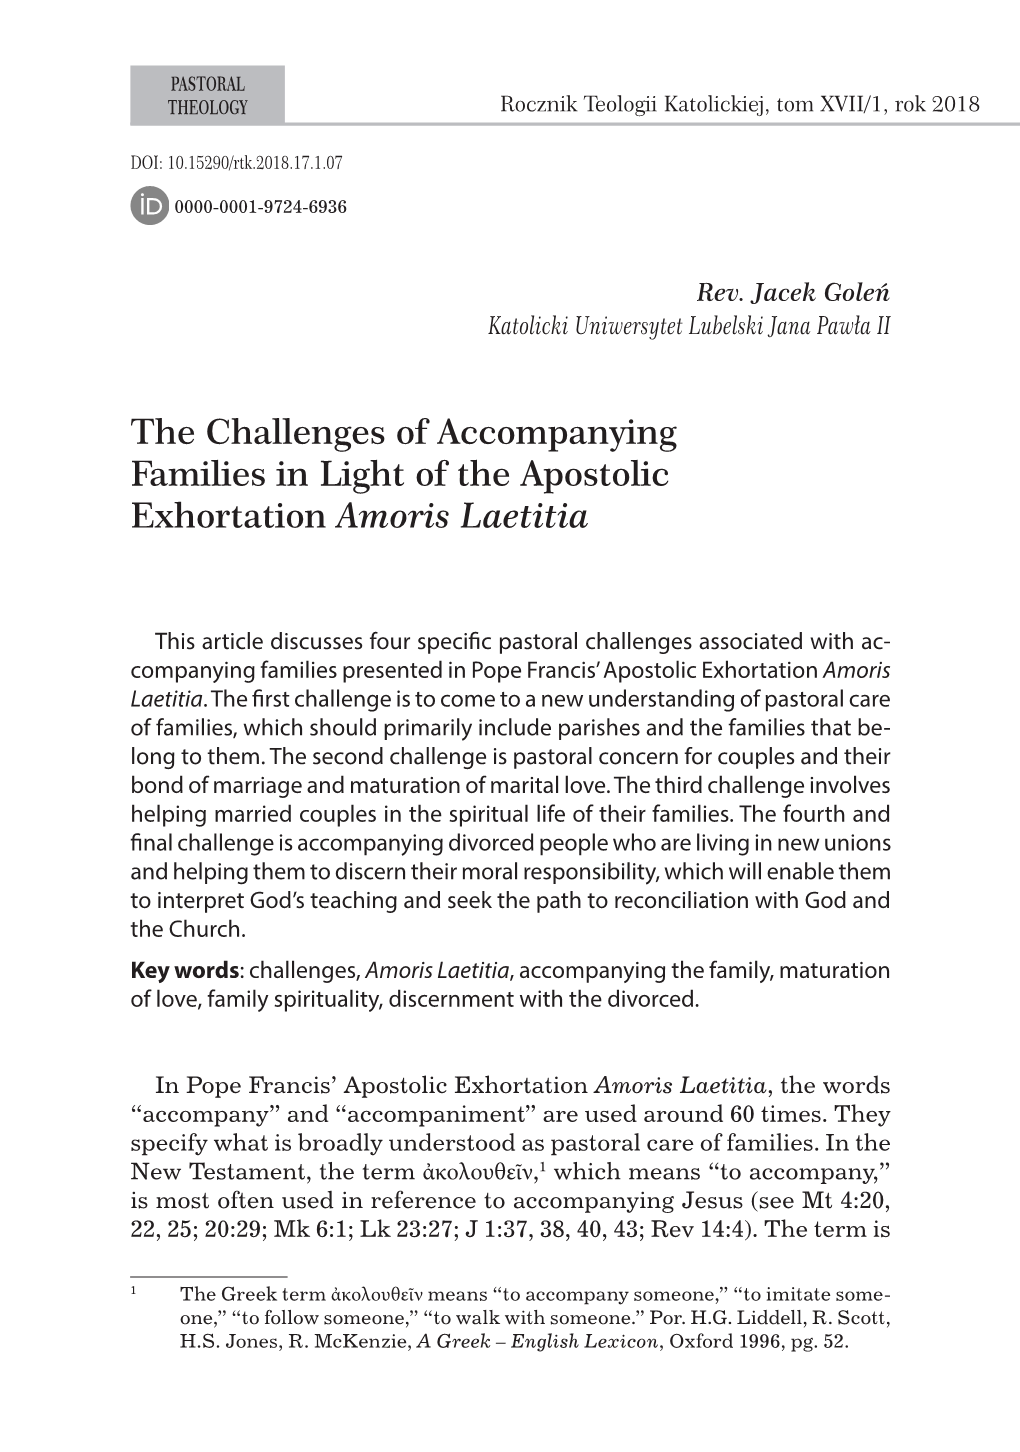 The Challenges of Accompanying Families in Light of the Apostolic Exhortation Amoris Laetitia